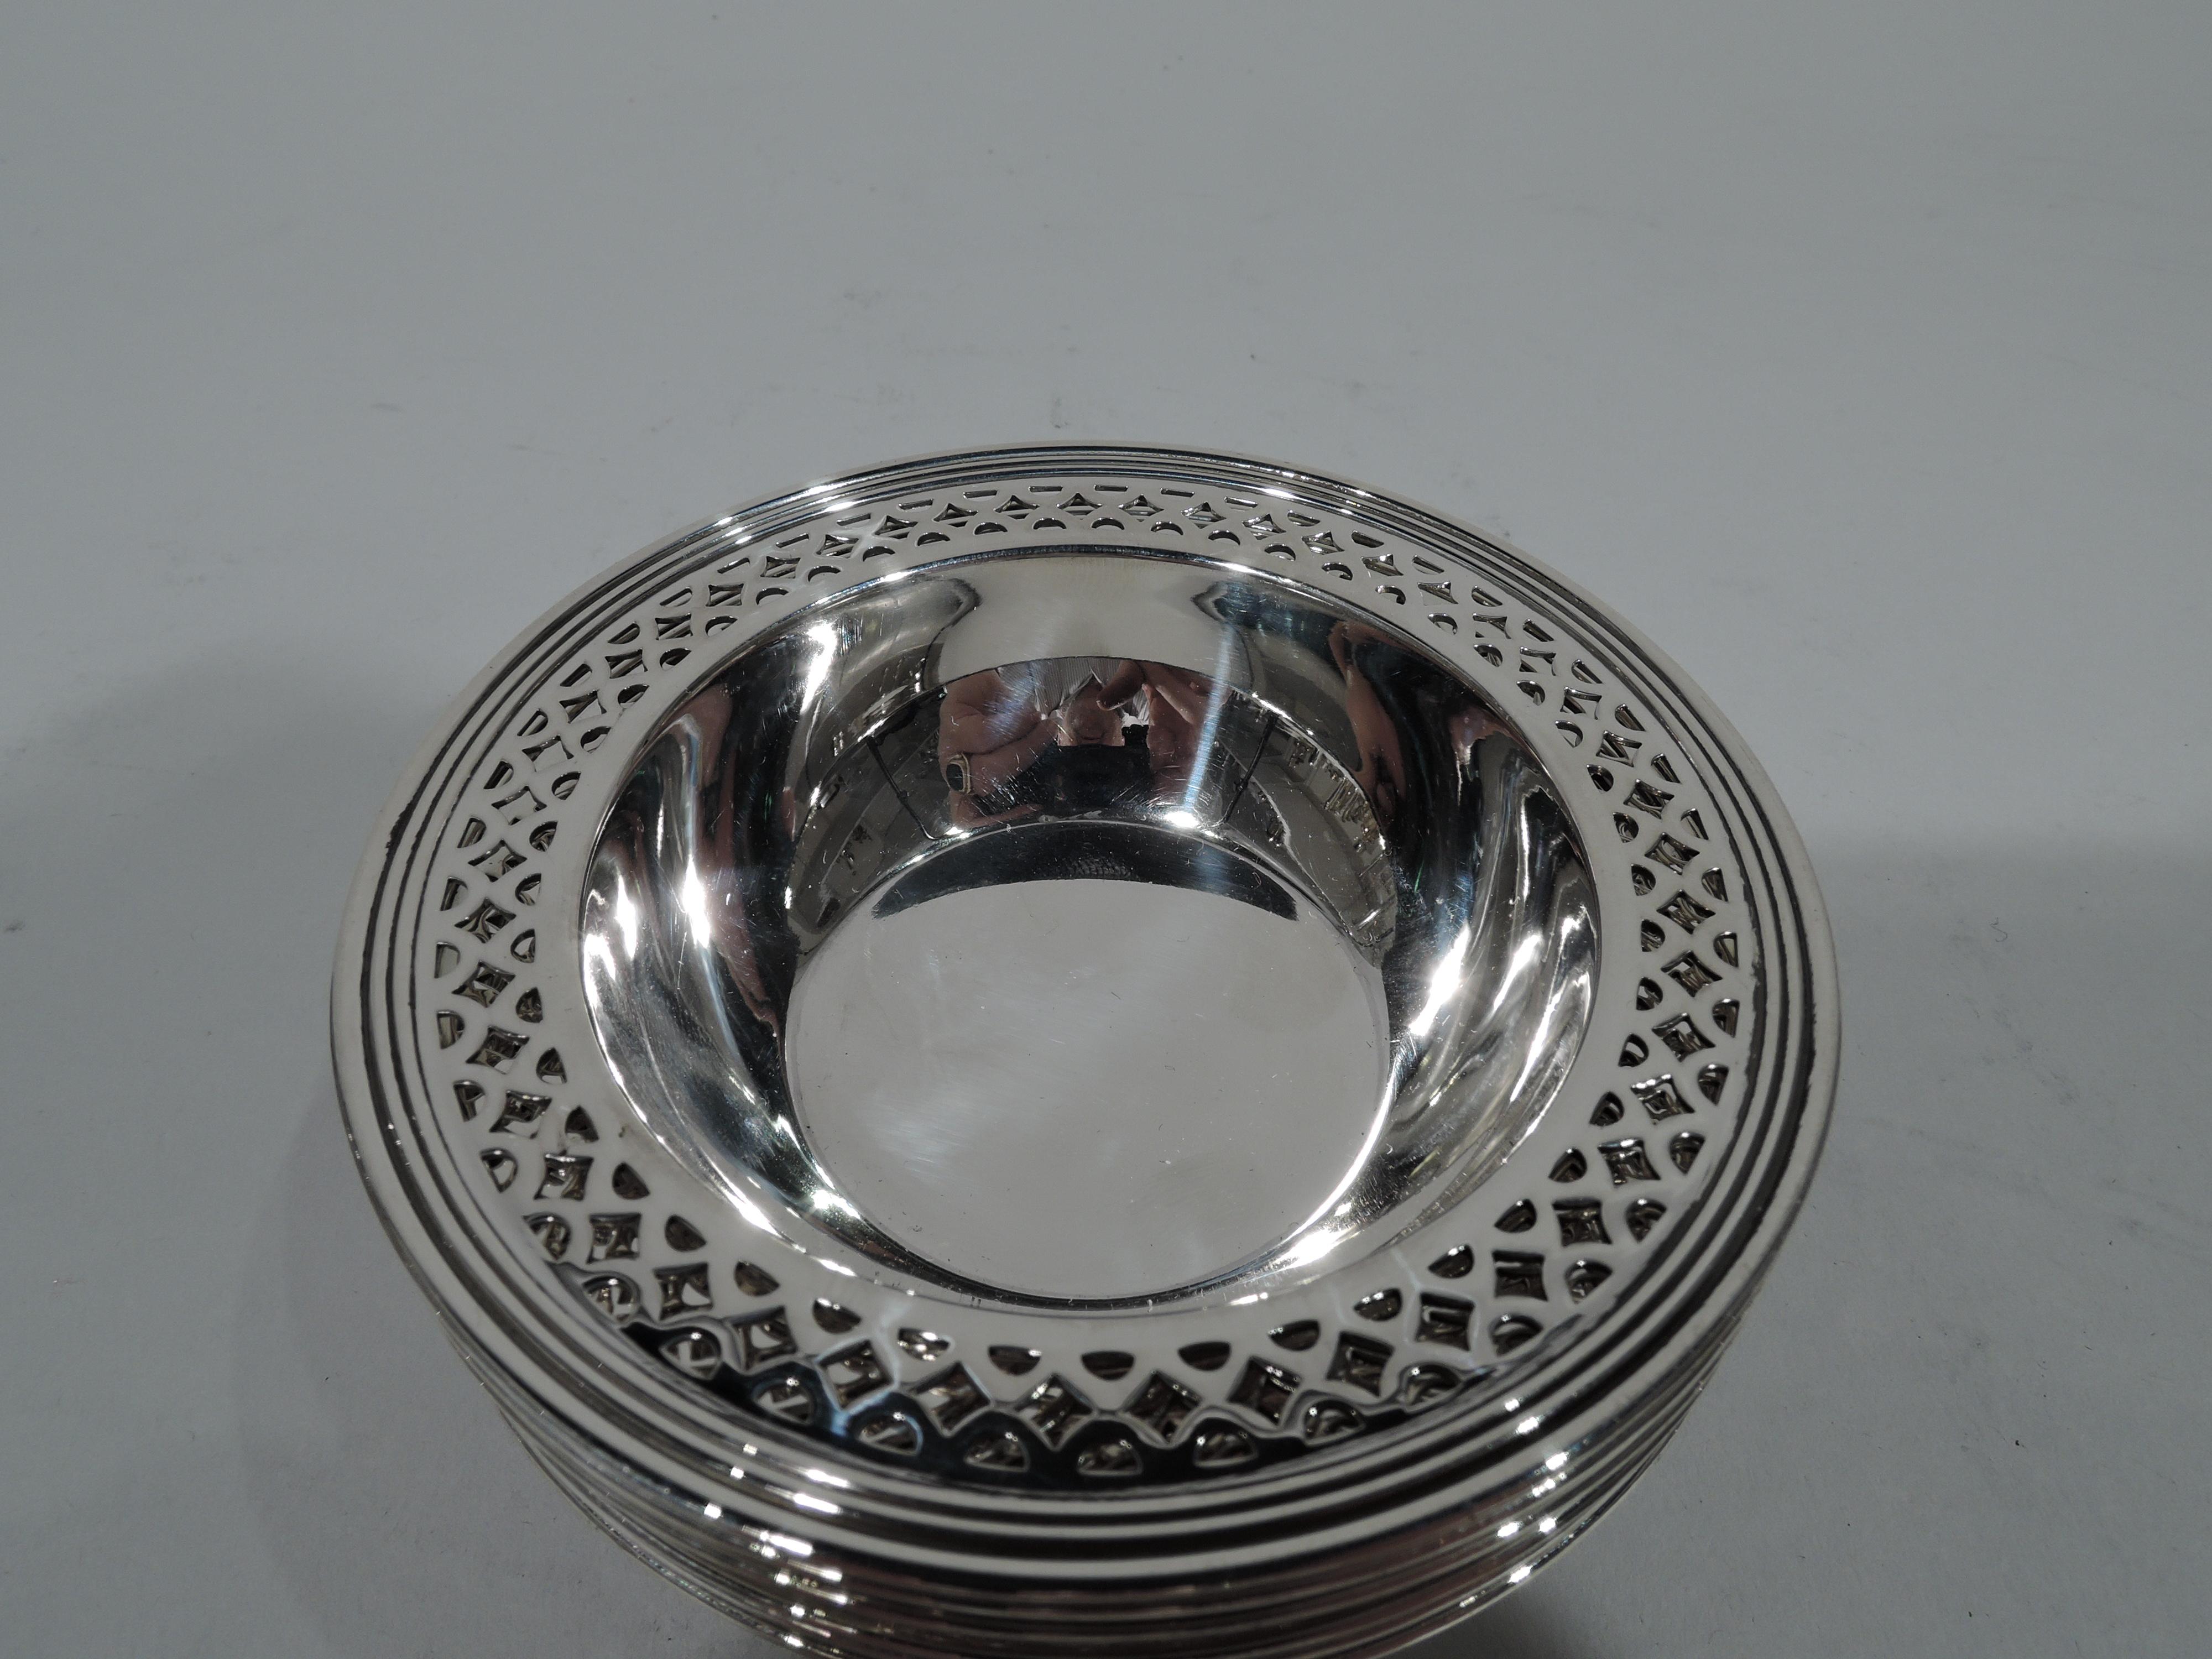 Set of 6 Art Deco sterling silver nut dishes. Made by Tiffany & Co. in New York, circa 1922. Each: Solid and tapering well and flat rim with geometric piercing and reeding. Hallmark includes pattern no. 20096K (first produced in 1922) and director’s